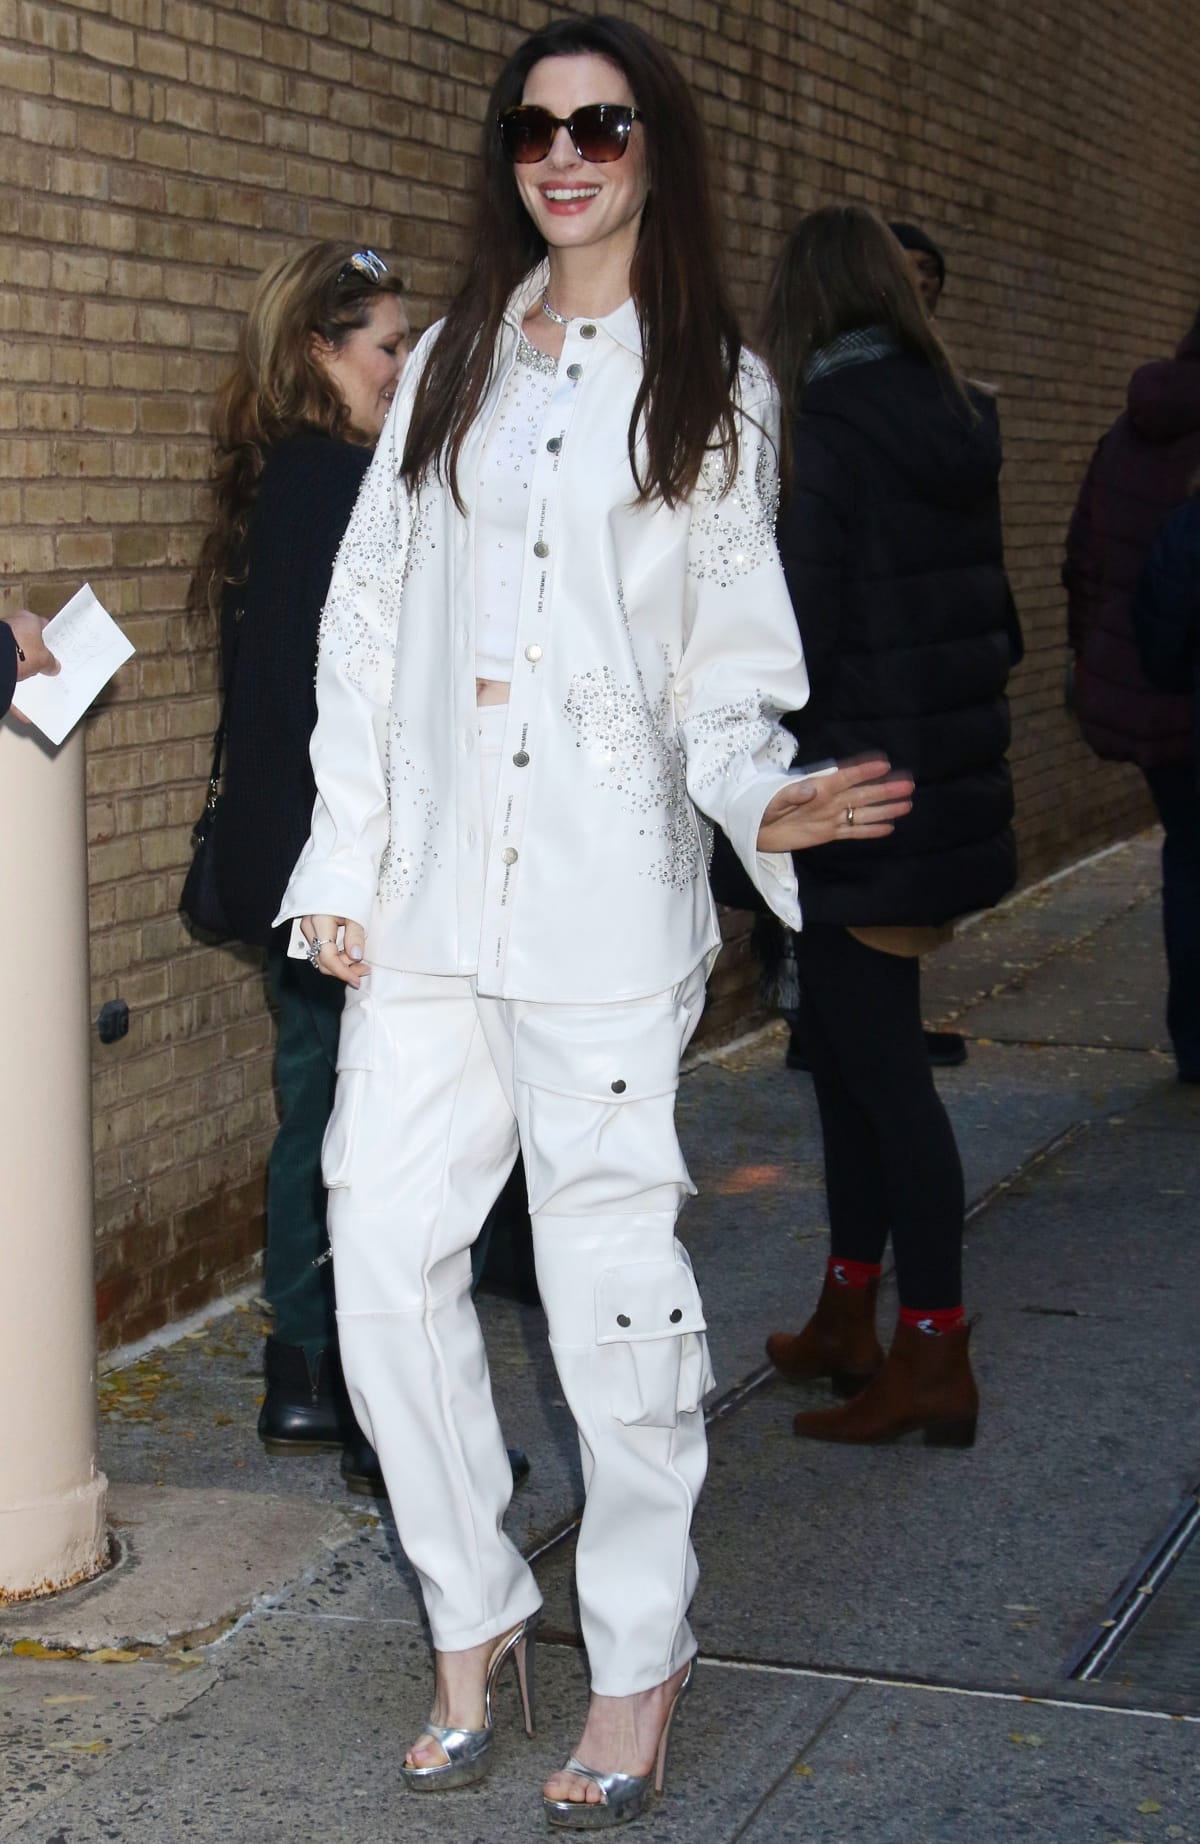 Anne Hathaway looking effortlessly chic in an all-white ensemble featuring an embellished crop top, cargo pants, and oversized jacket while outside the studios of Live with Kelly and Mark